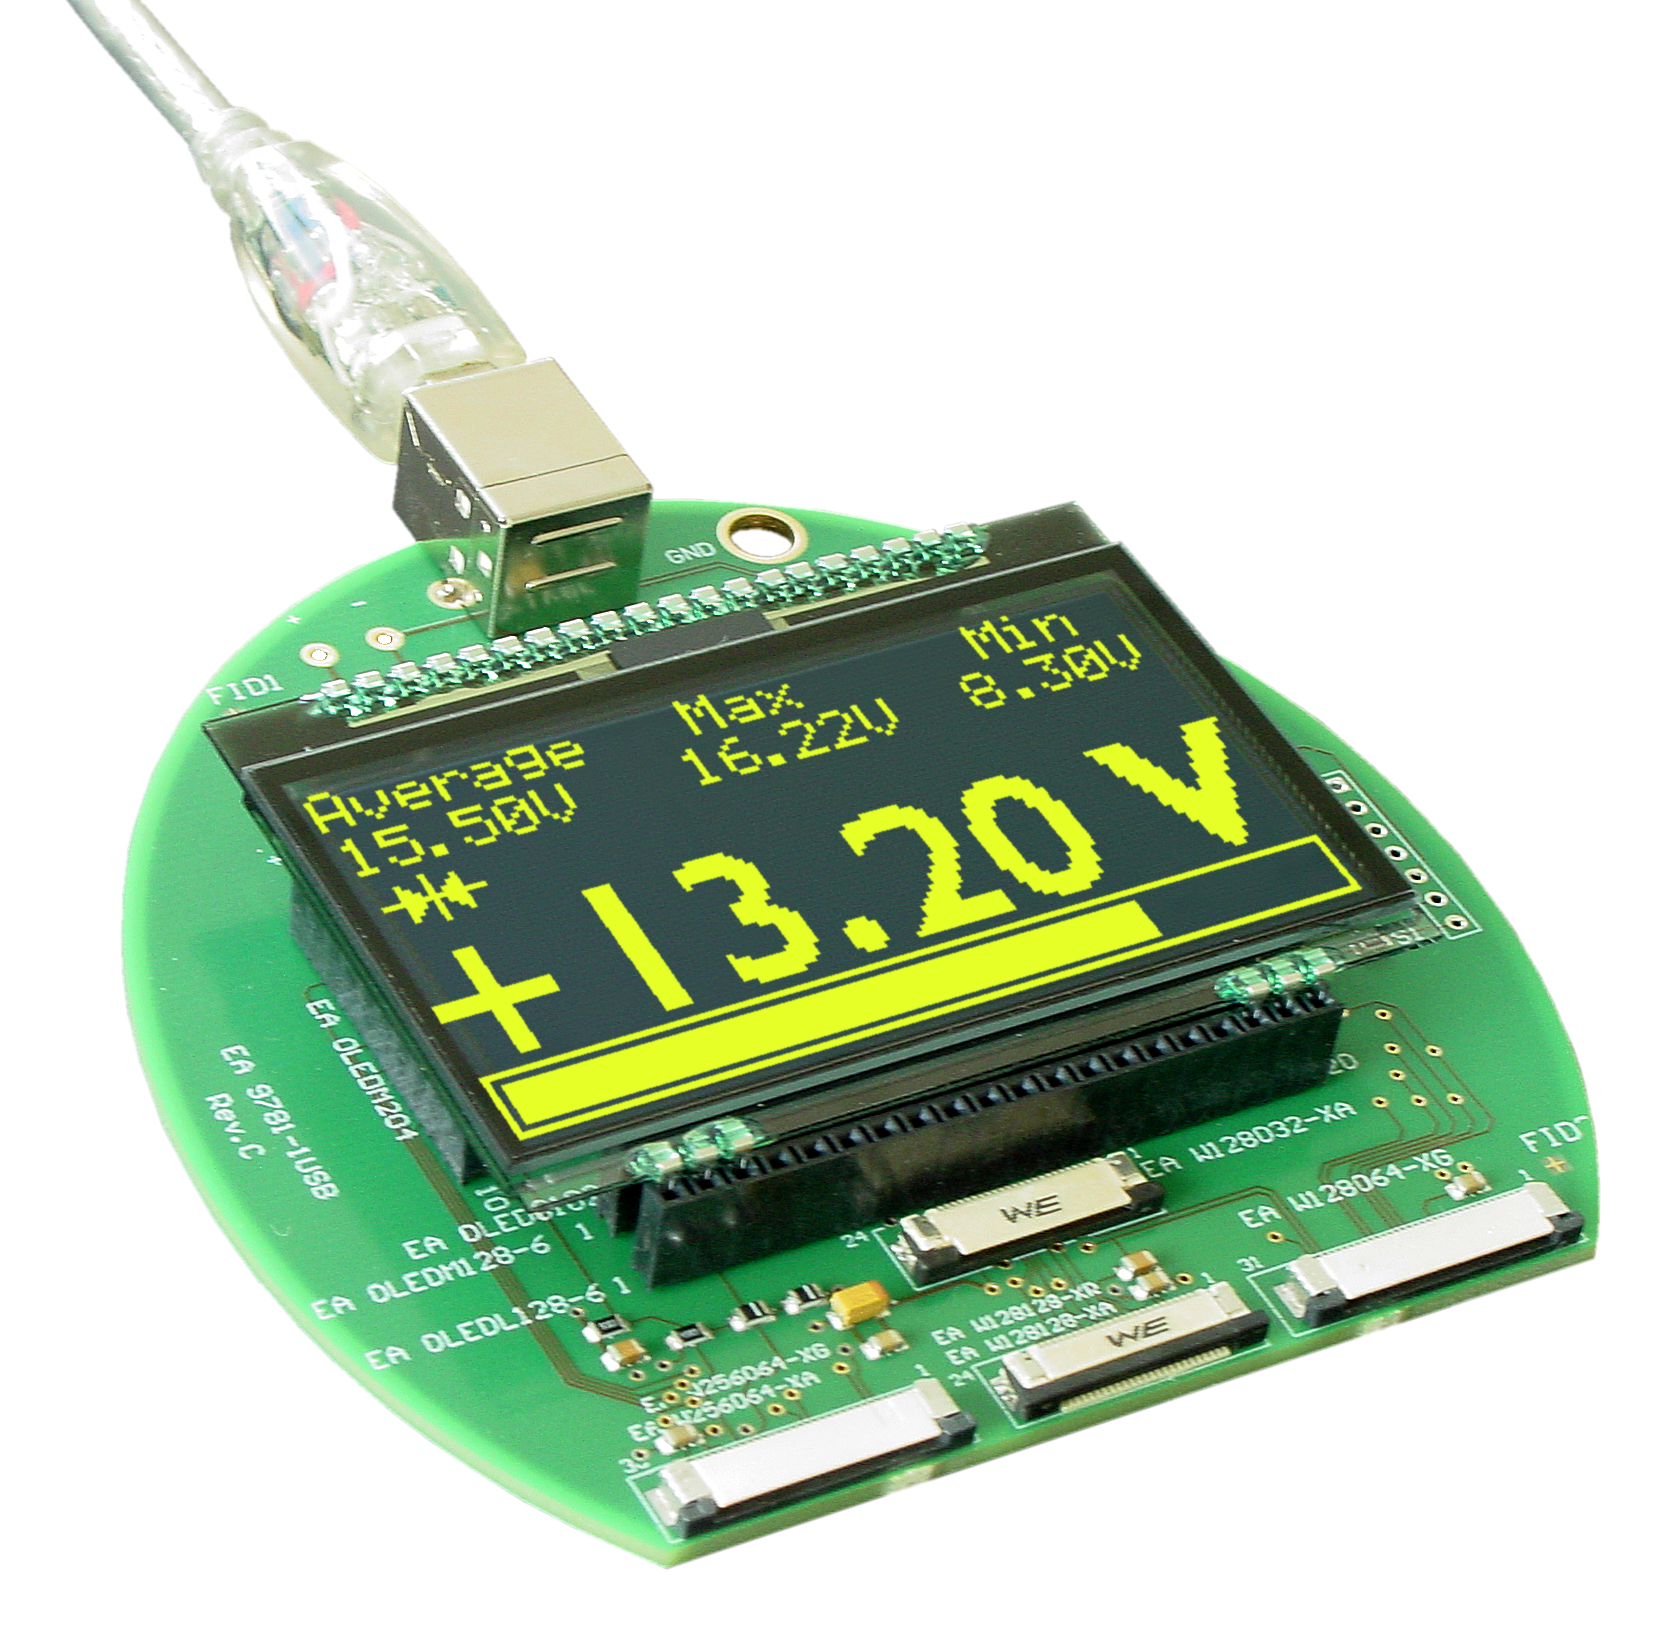 USB-Test board for OLED